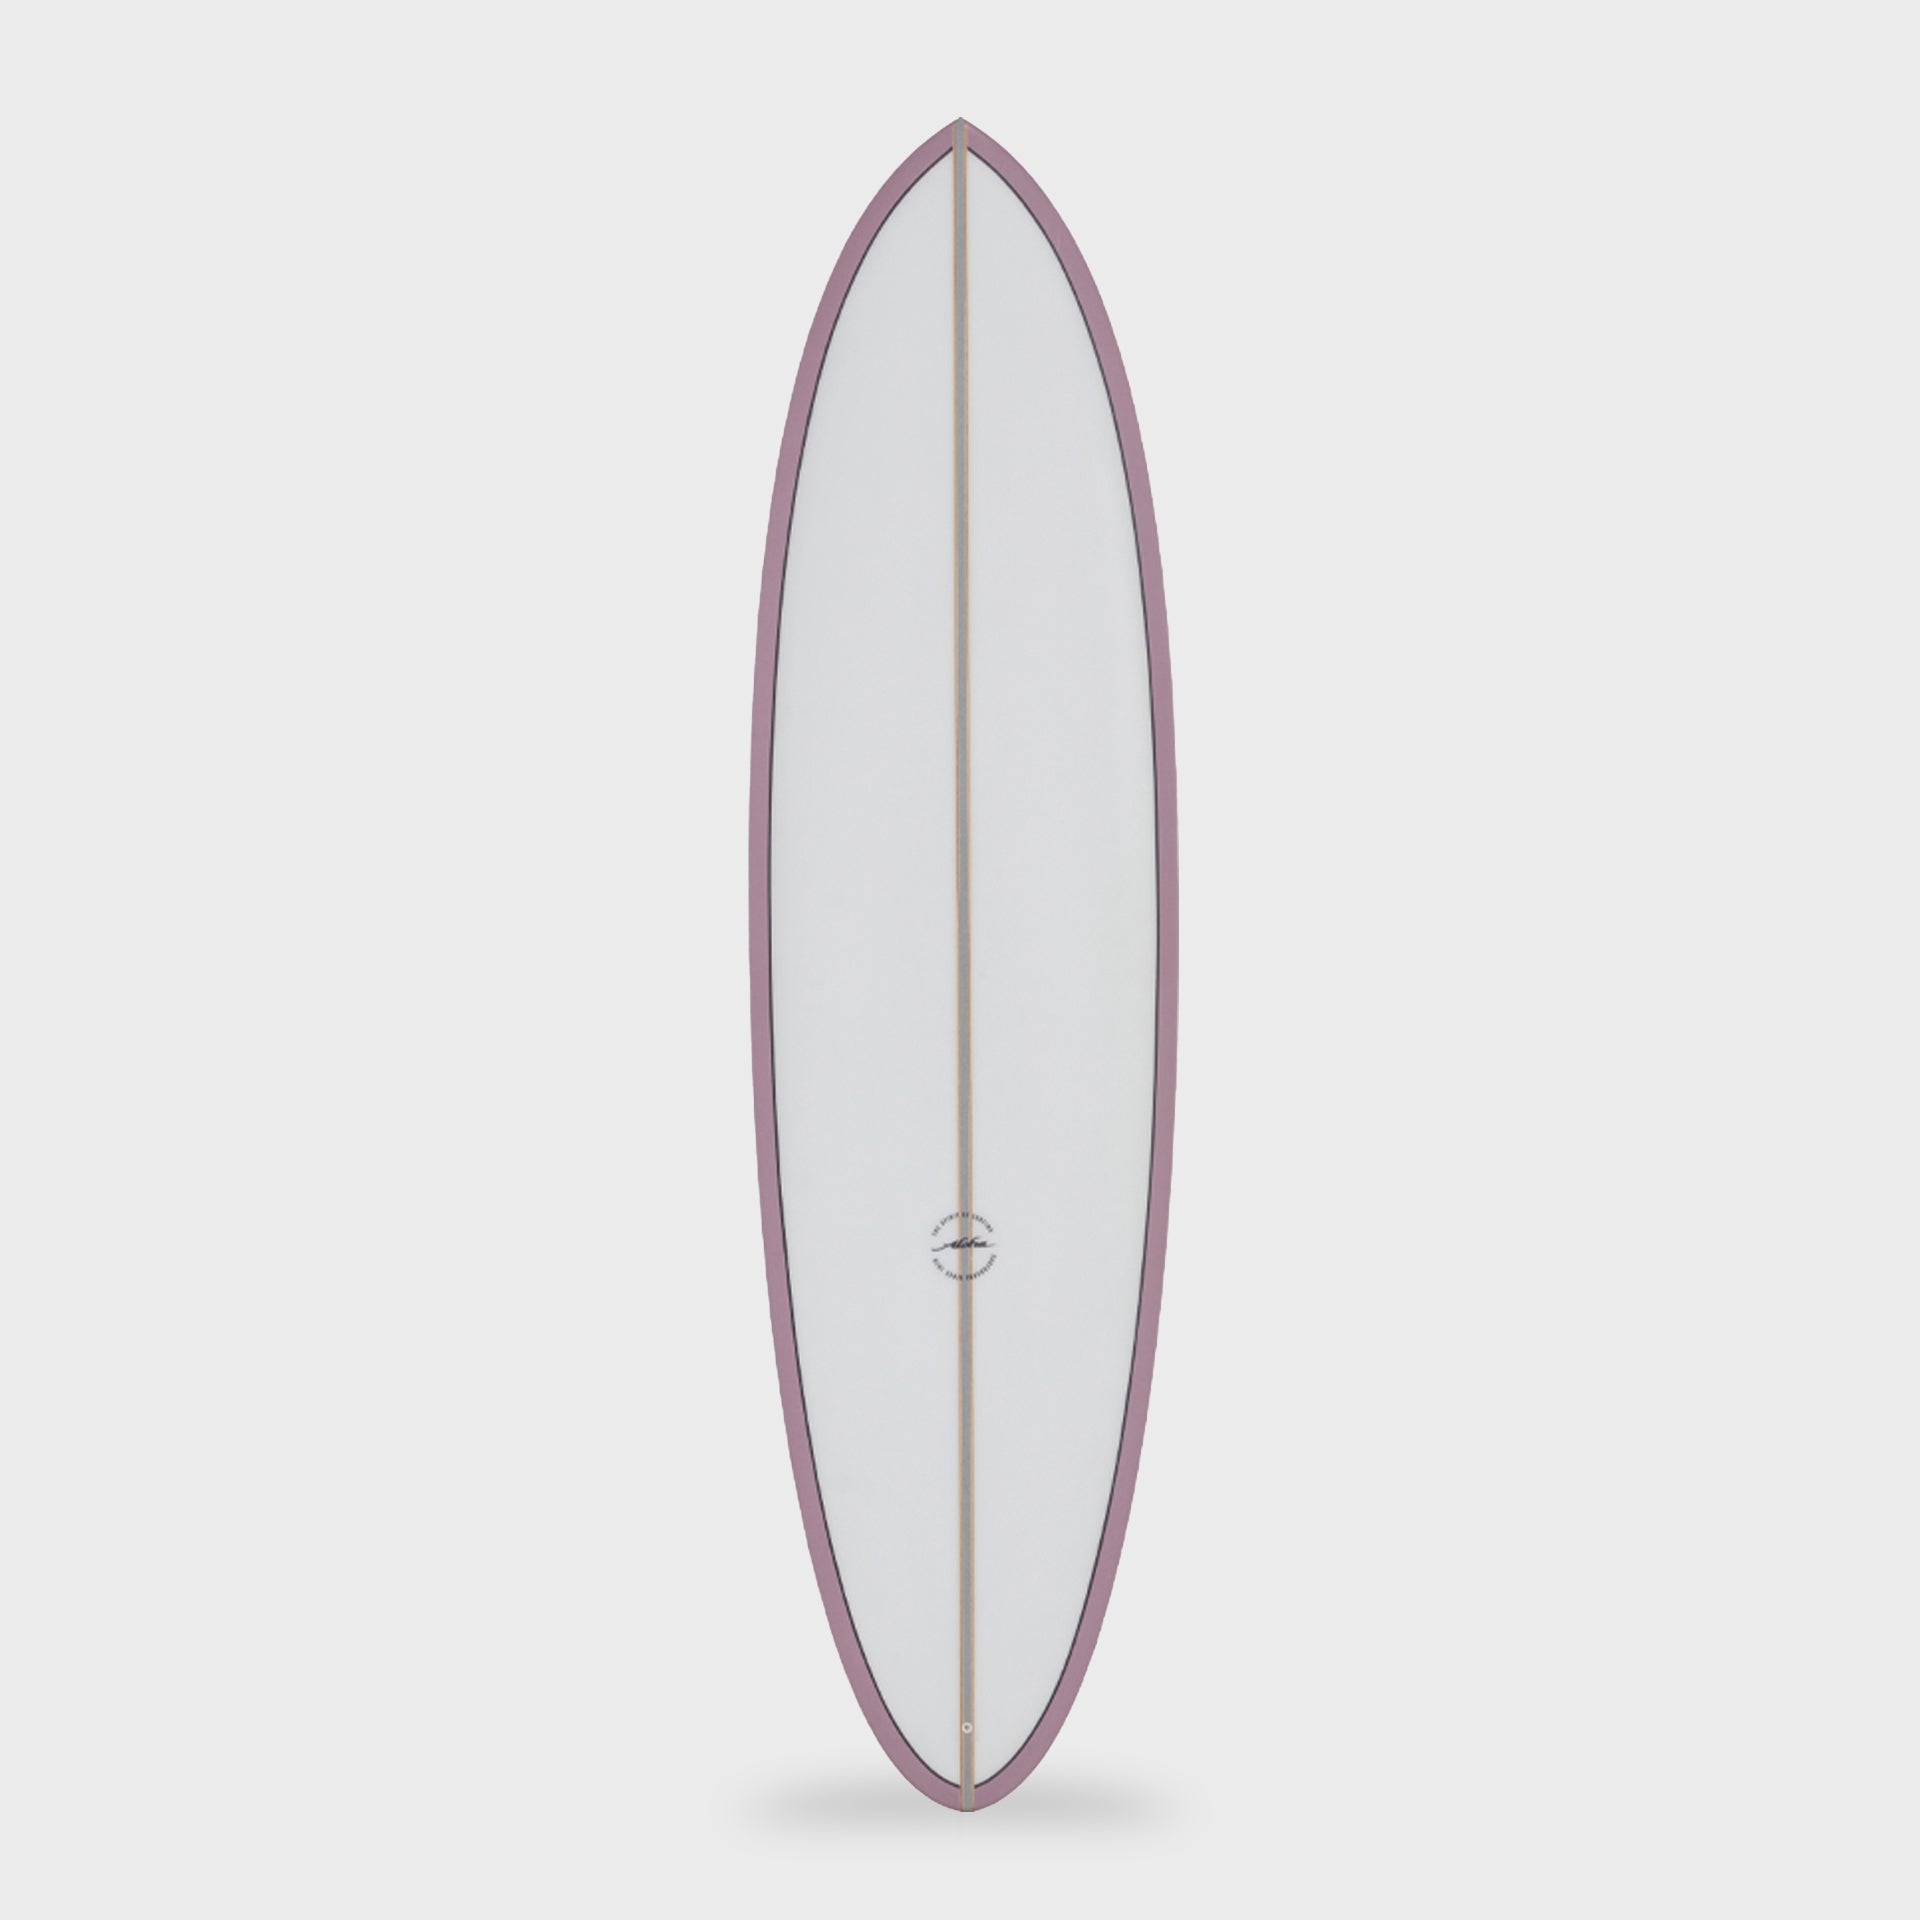 EZ - MID PU - PVCP - Surfboard, 6'6, 6'10, 7'2, 7'4 and 7'8 - Lavender - ManGo Surfing